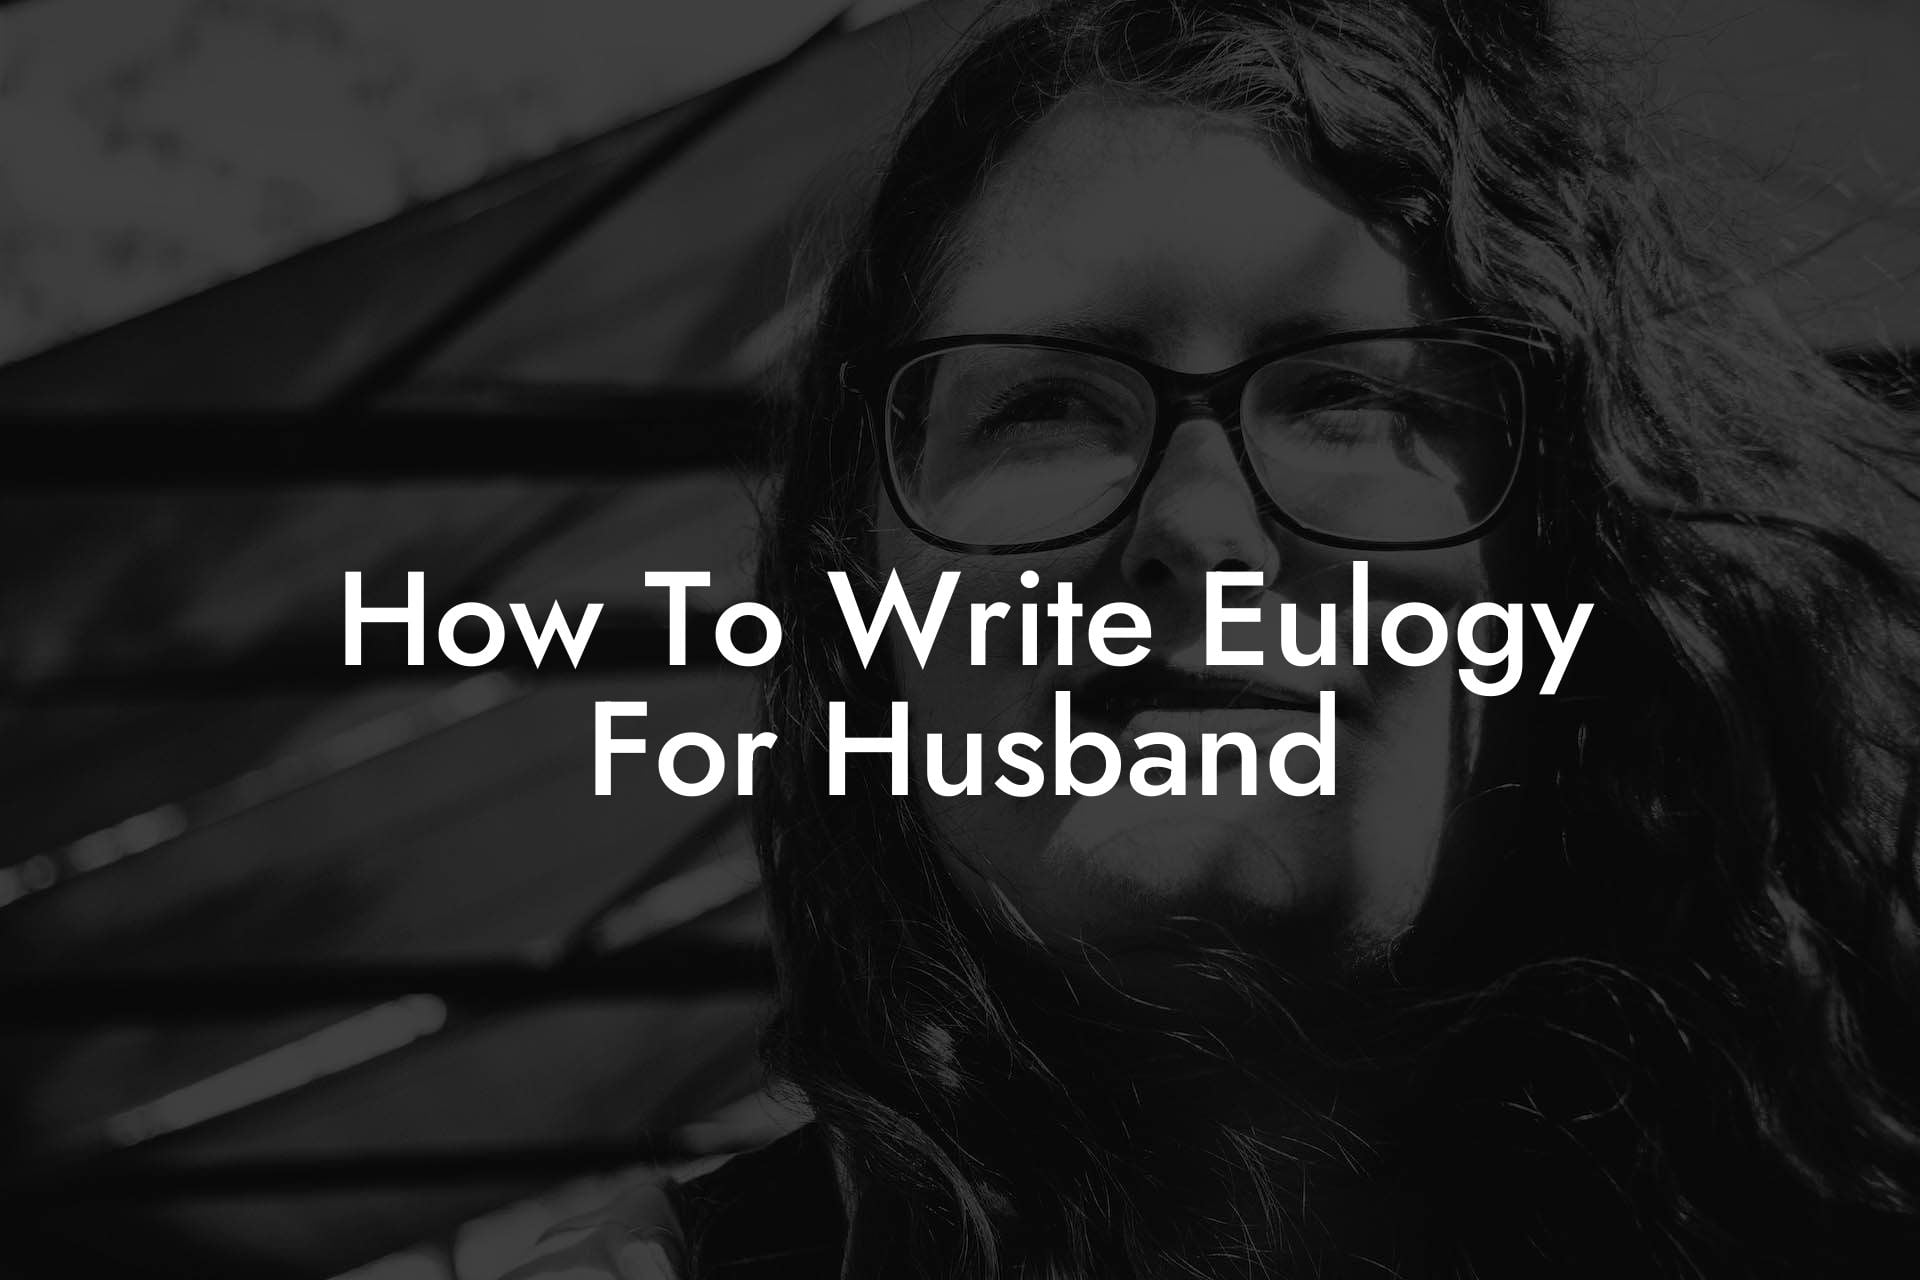 How To Write Eulogy For Husband